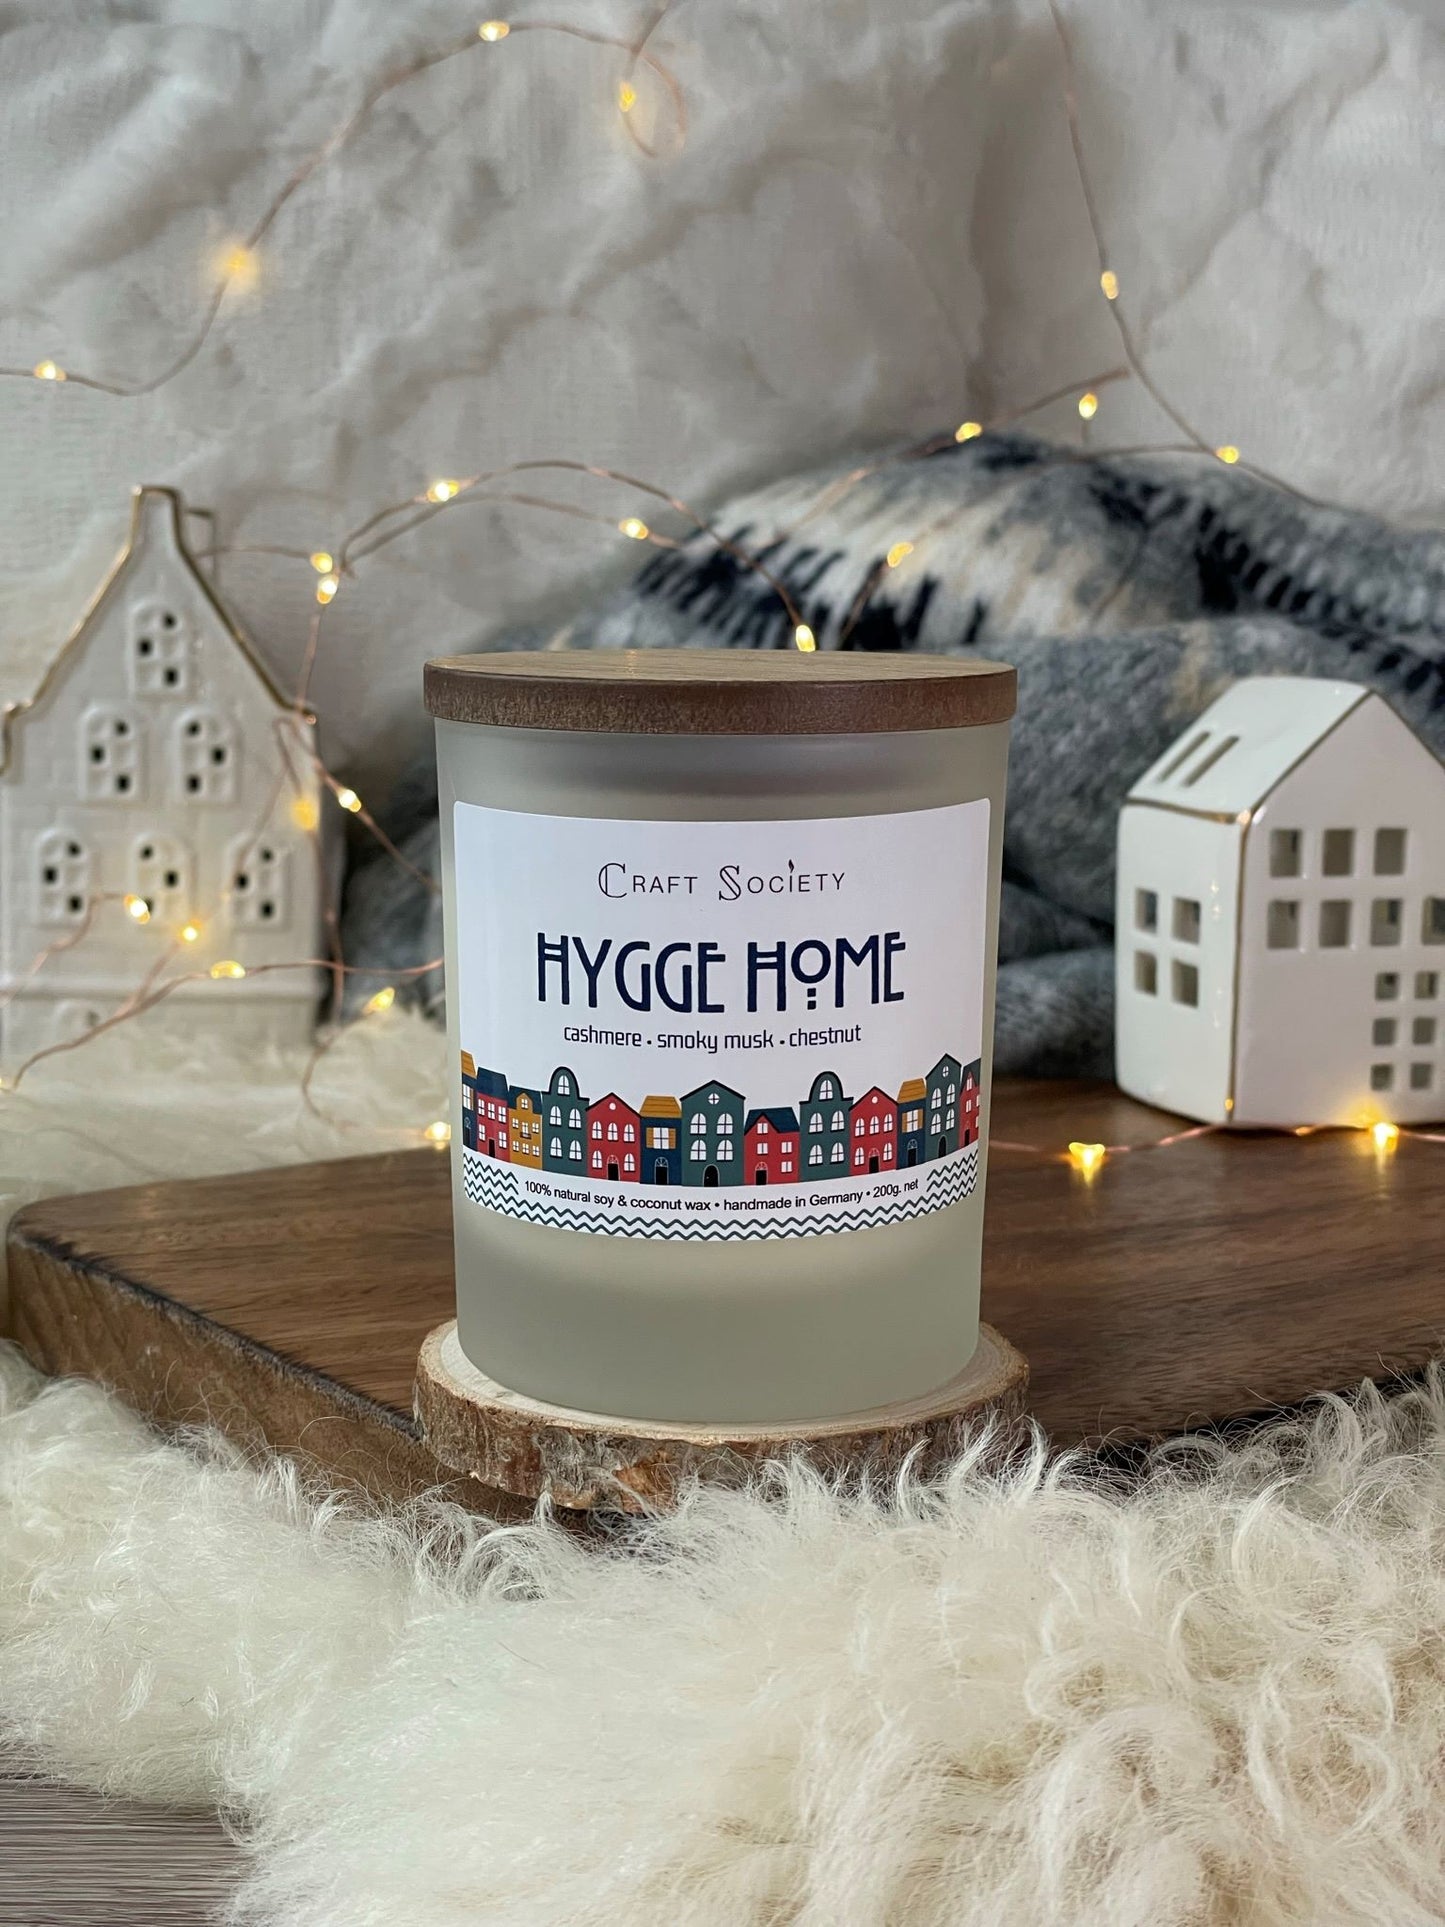 A brand new deluxe scented candle on a decorated background